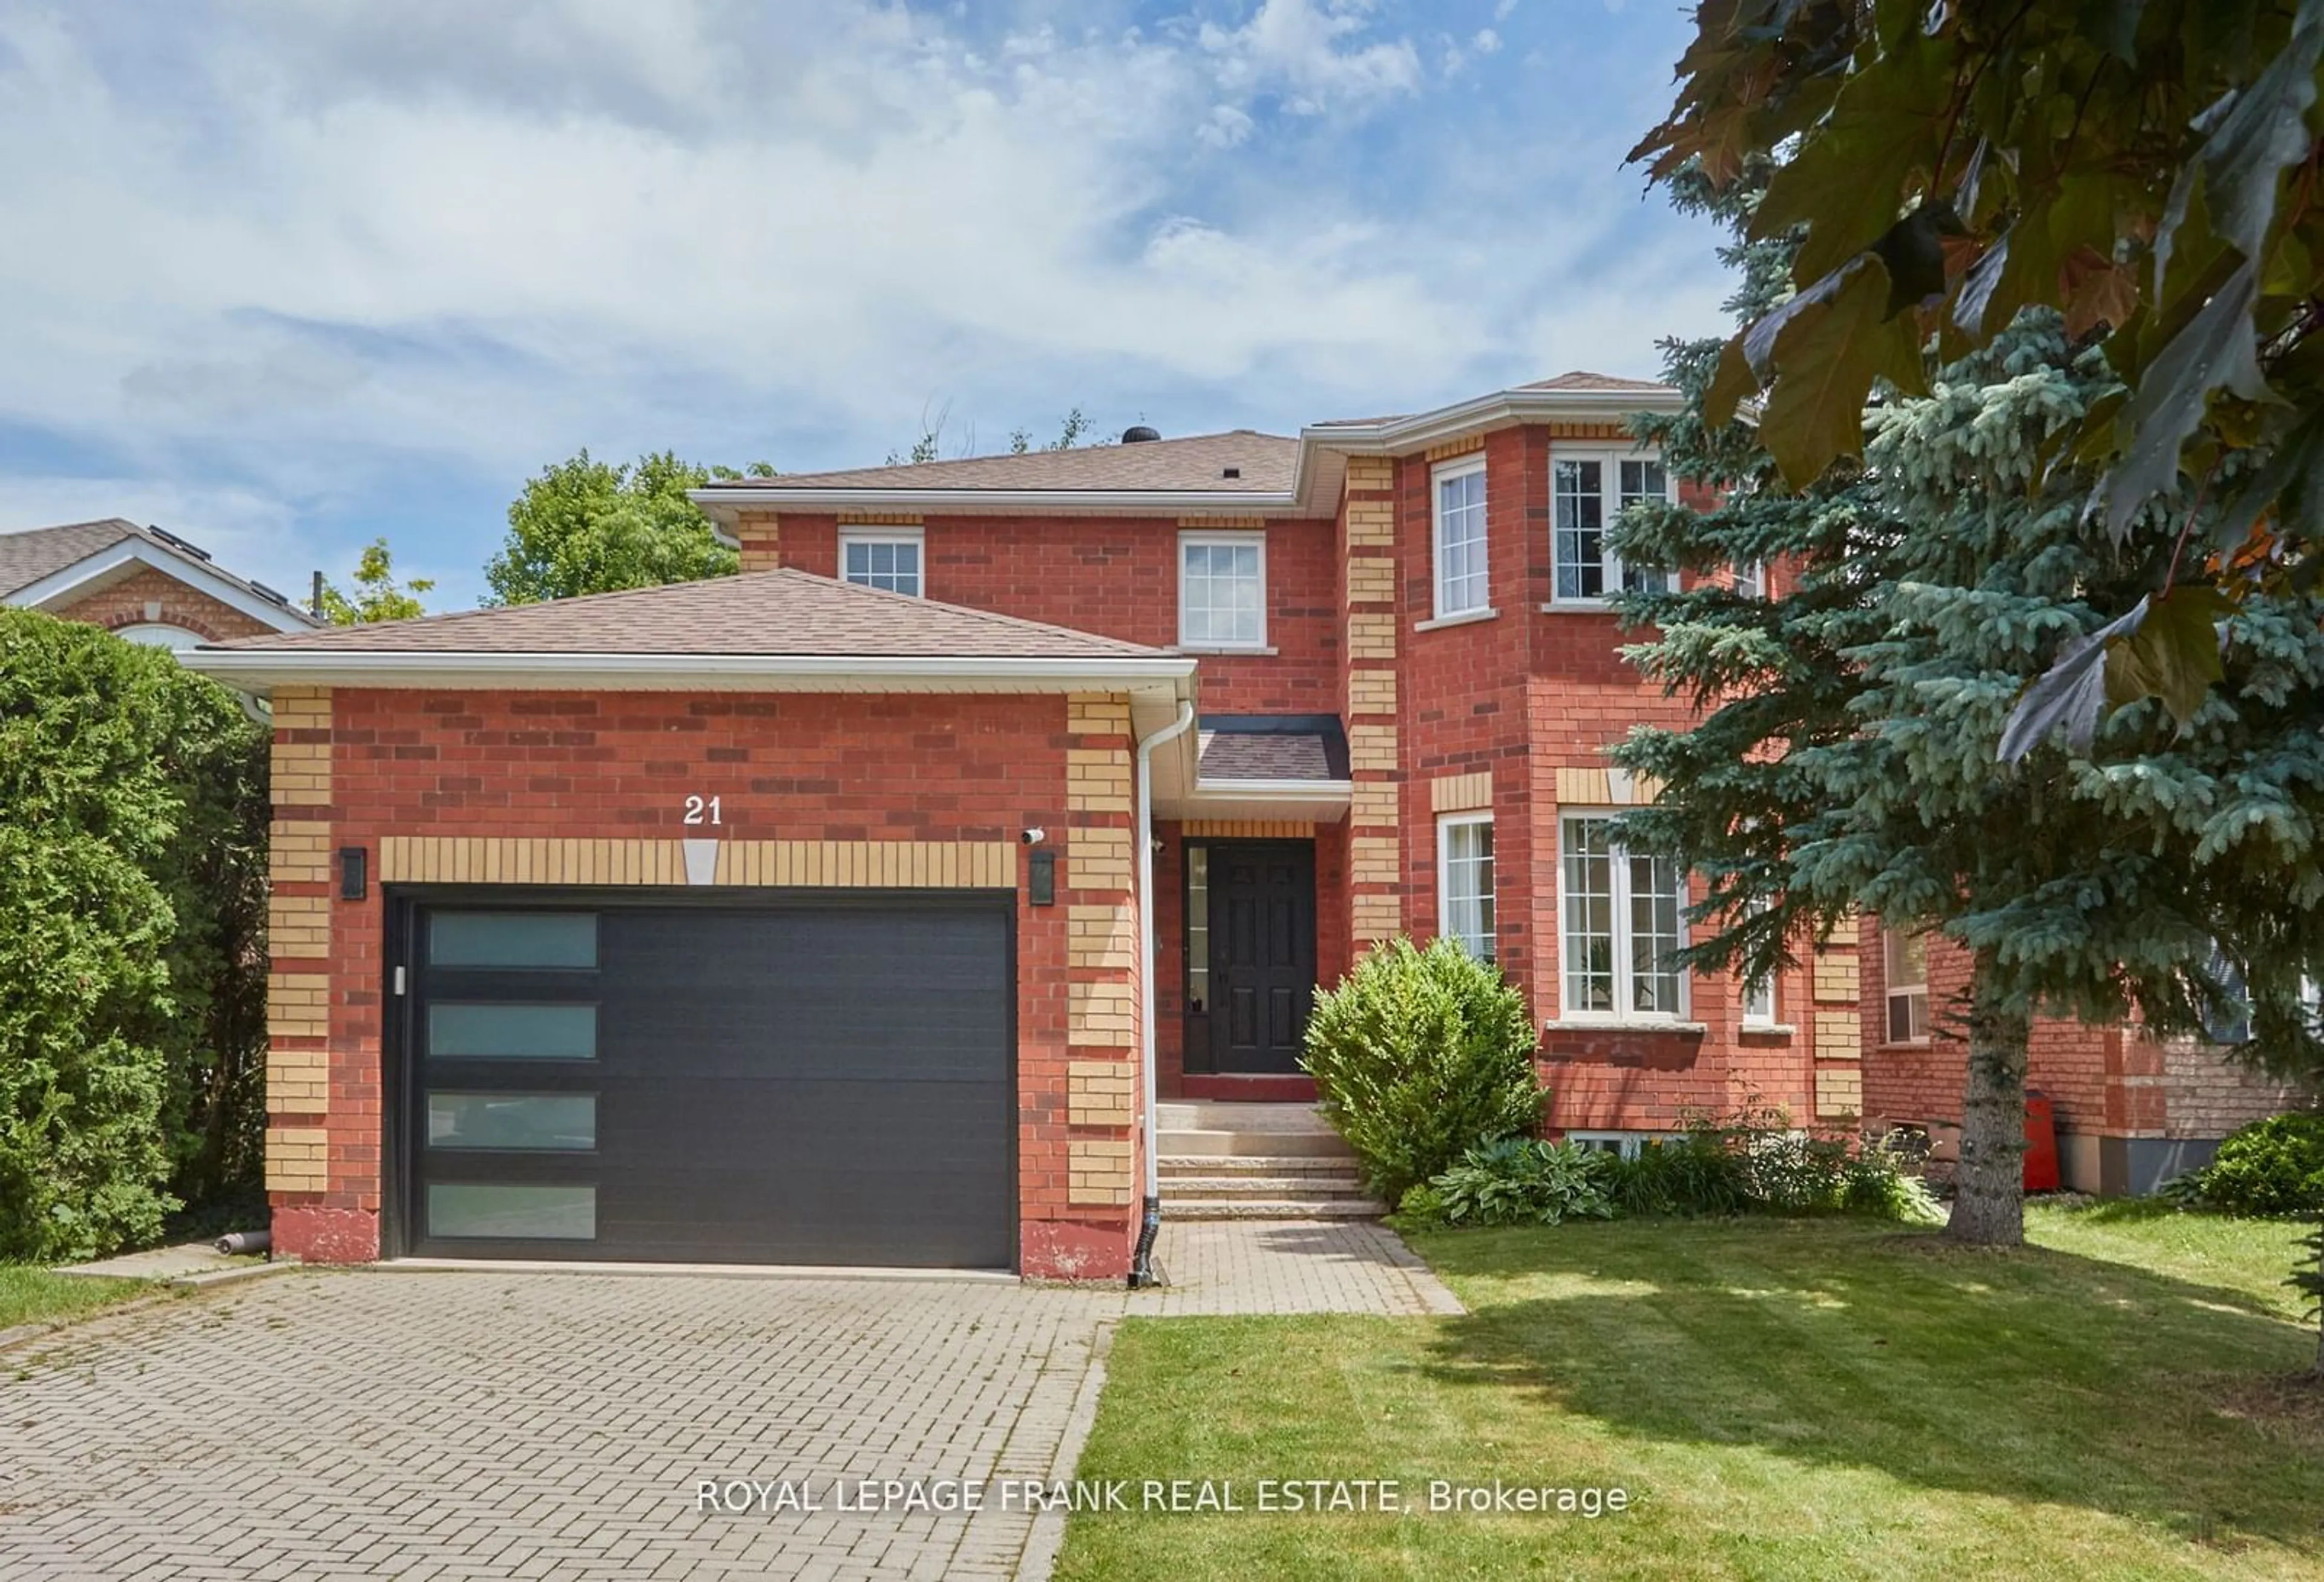 Home with brick exterior material for 21 Crompton Dr, Barrie Ontario L4M 6N1